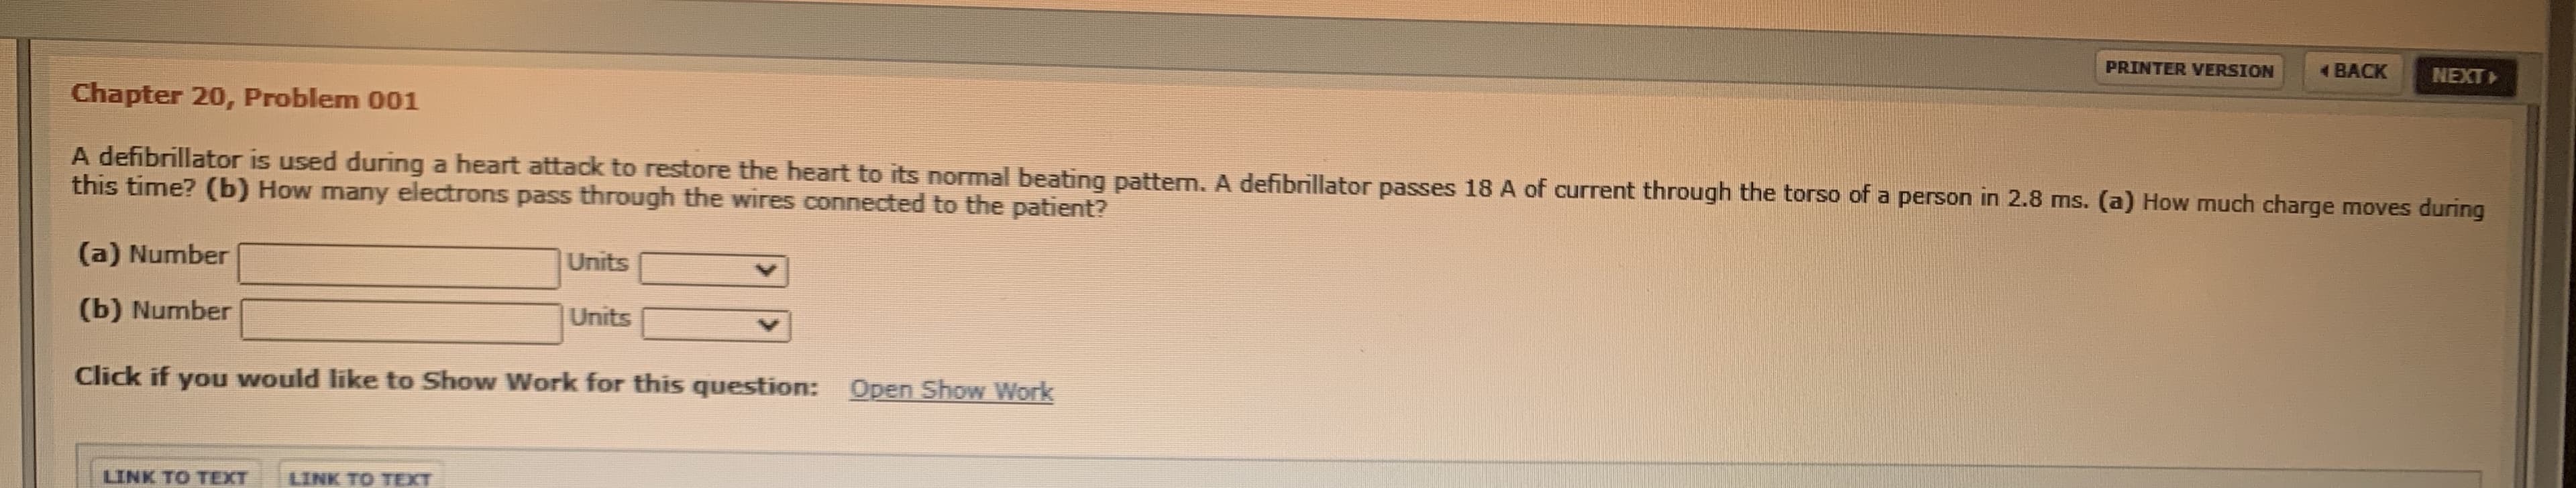 A defibrillator is used during a heart attack to restore the heart to its normal beating pattem. A defibrillator passes 18 A of current through the torso of a person in 2.8 ms. (a) How much charge moves during
this time? (b) How many electrons pass through the wires connected to the patient?
